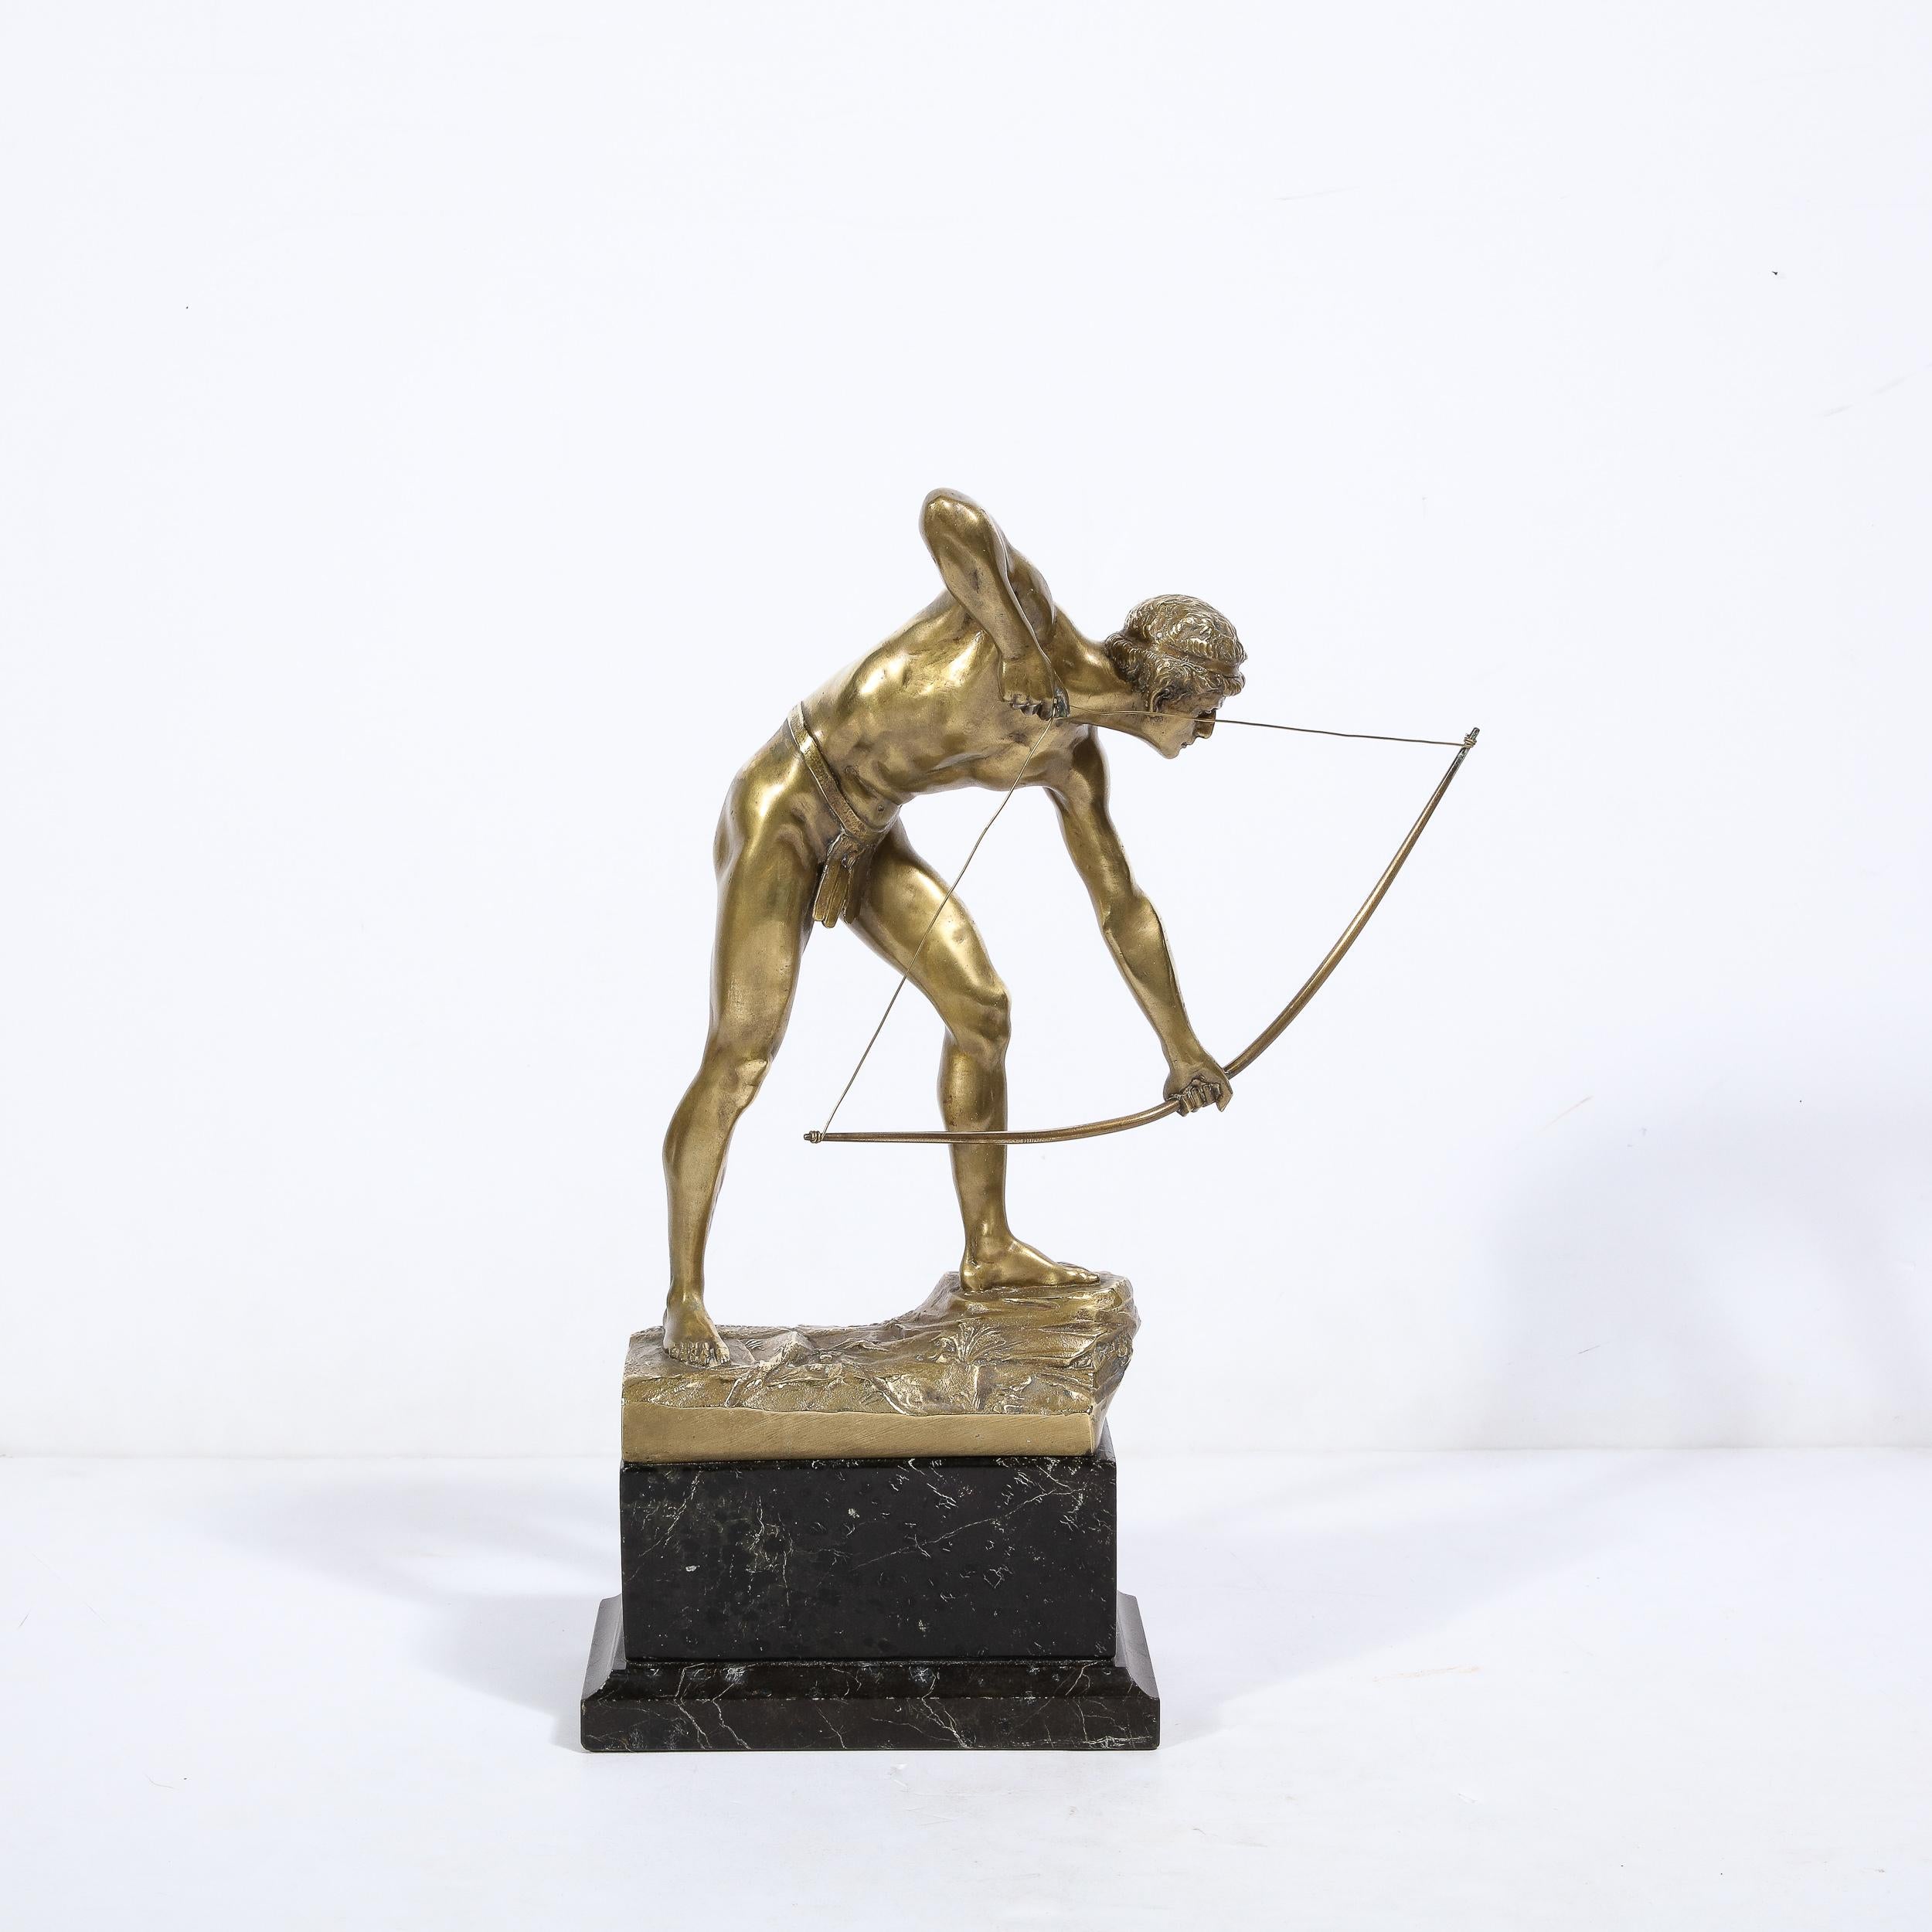 This gripping Art Deco Gilt Bronze Archer Sculpture on Black Marble Base is by the artist Otto Schmidt-Hofer and originates from Germany, Circa 1920. This incredibly beautiful sculpture captures remarkable physicality and observation of the archers